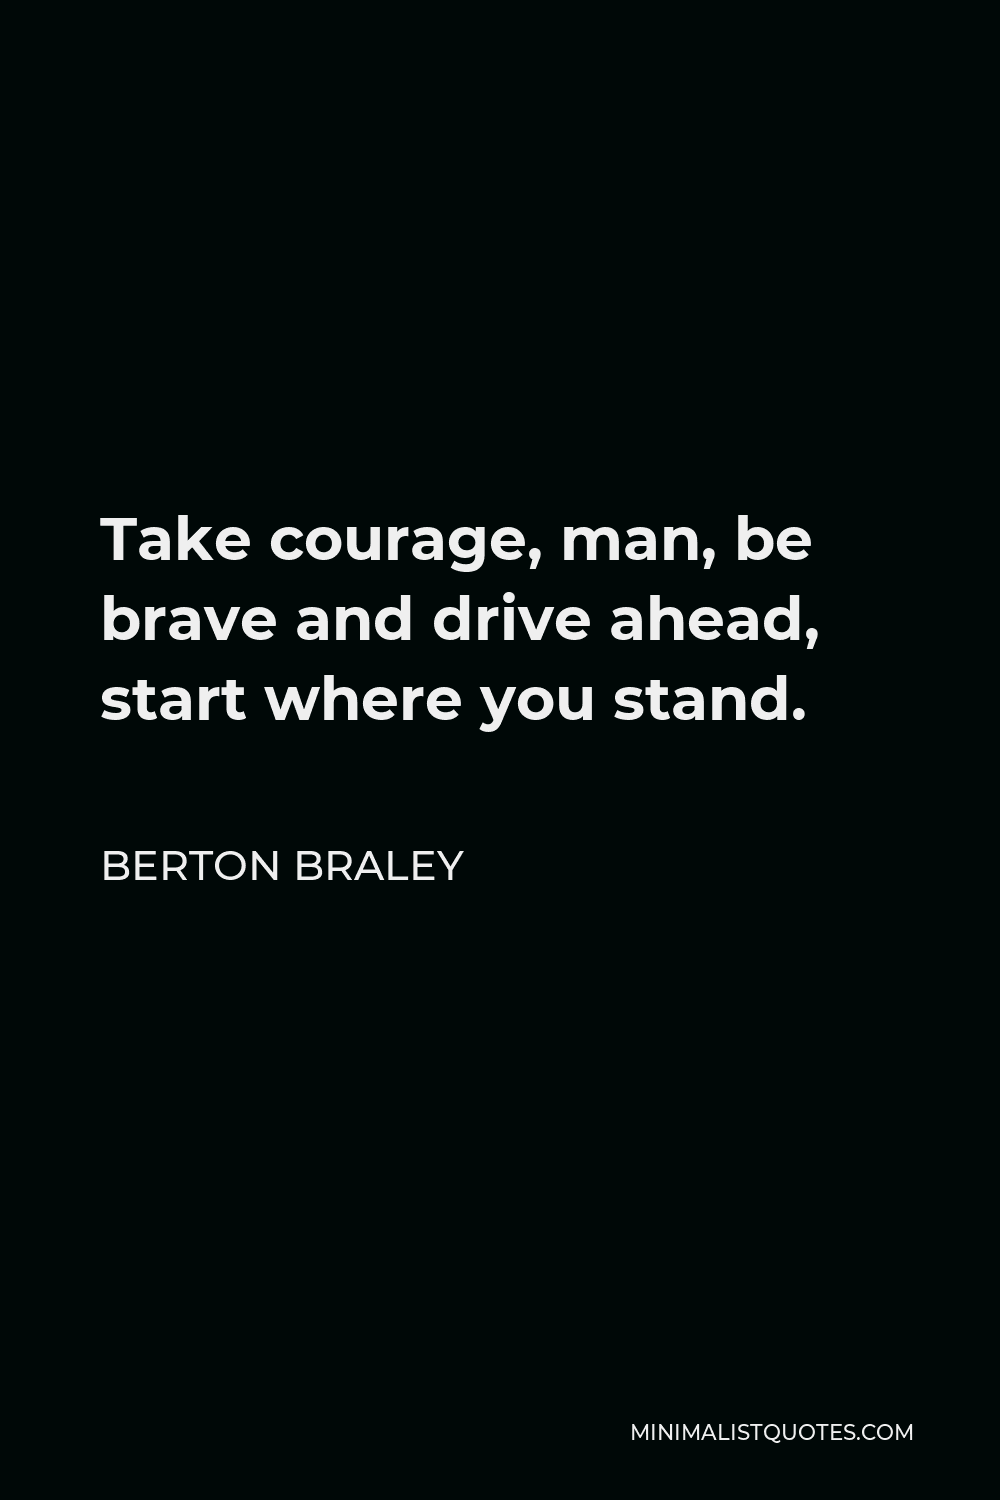 Berton Braley Quote - Take courage, man, be brave and drive ahead, start where you stand.